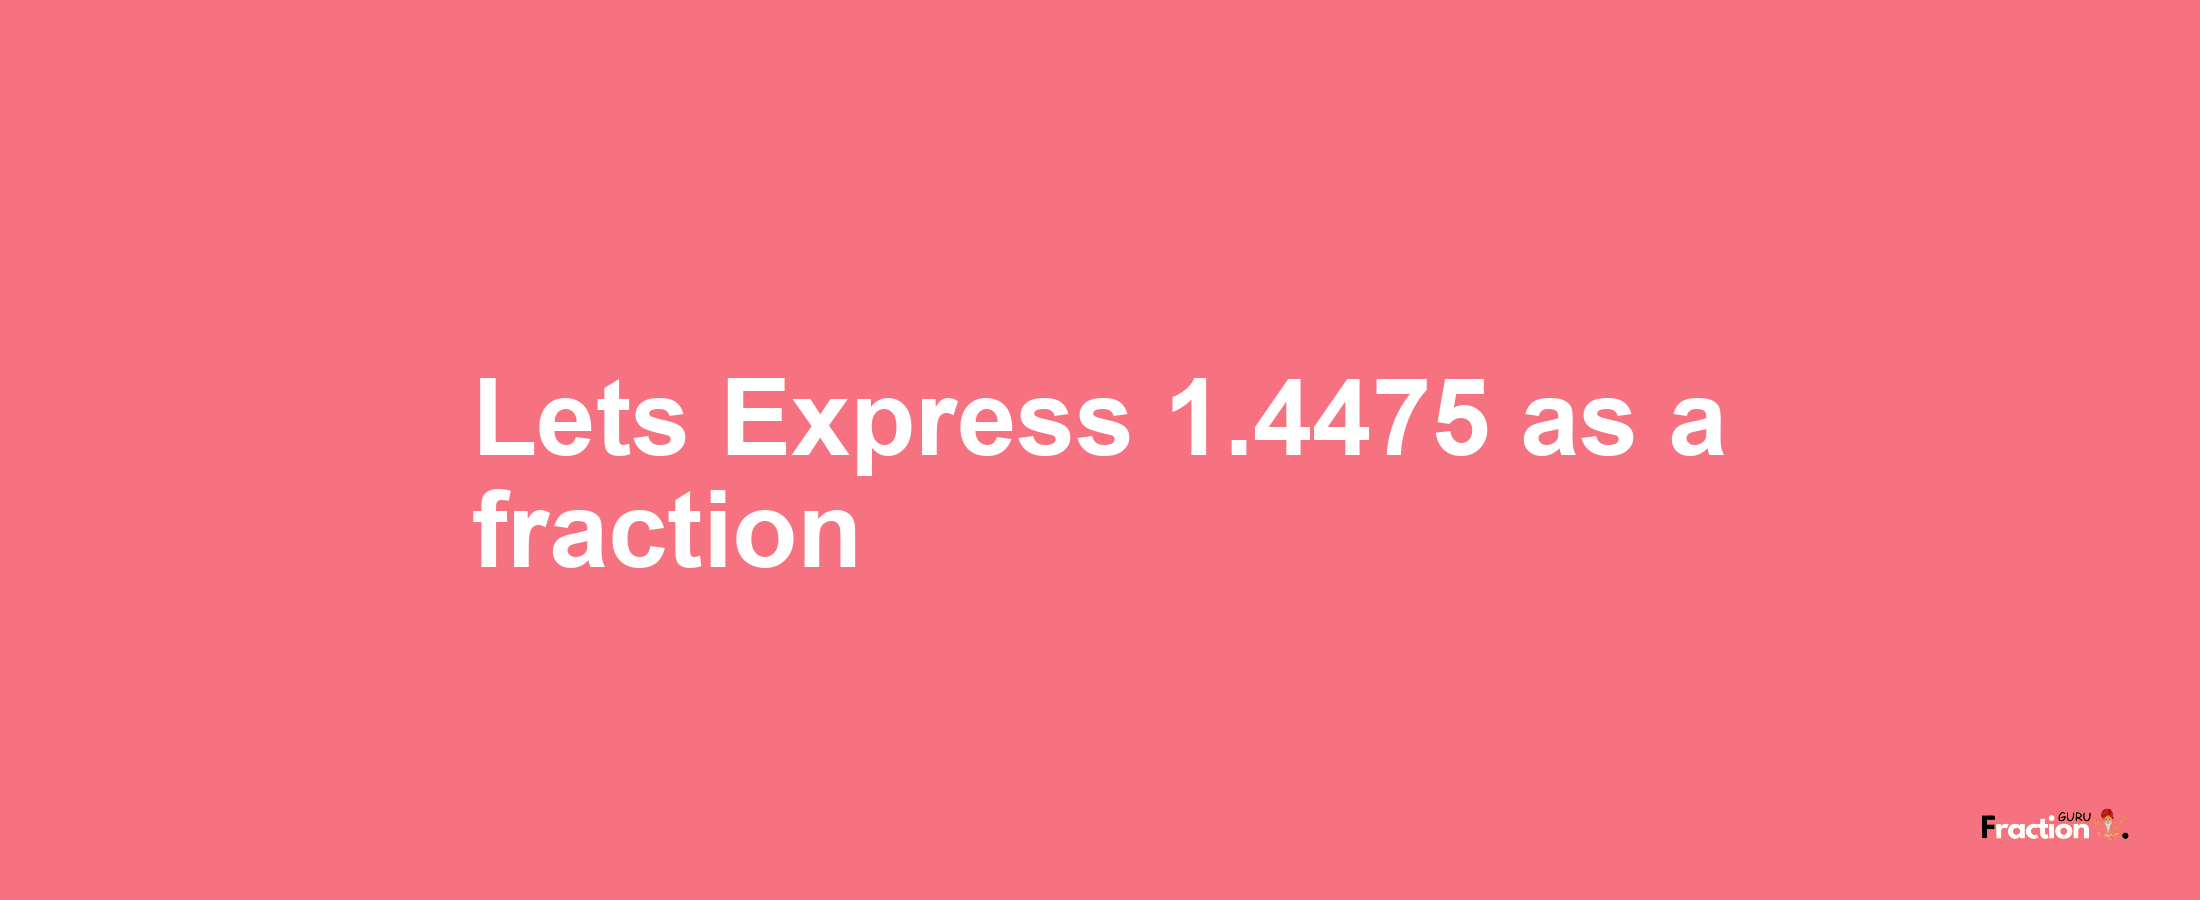 Lets Express 1.4475 as afraction